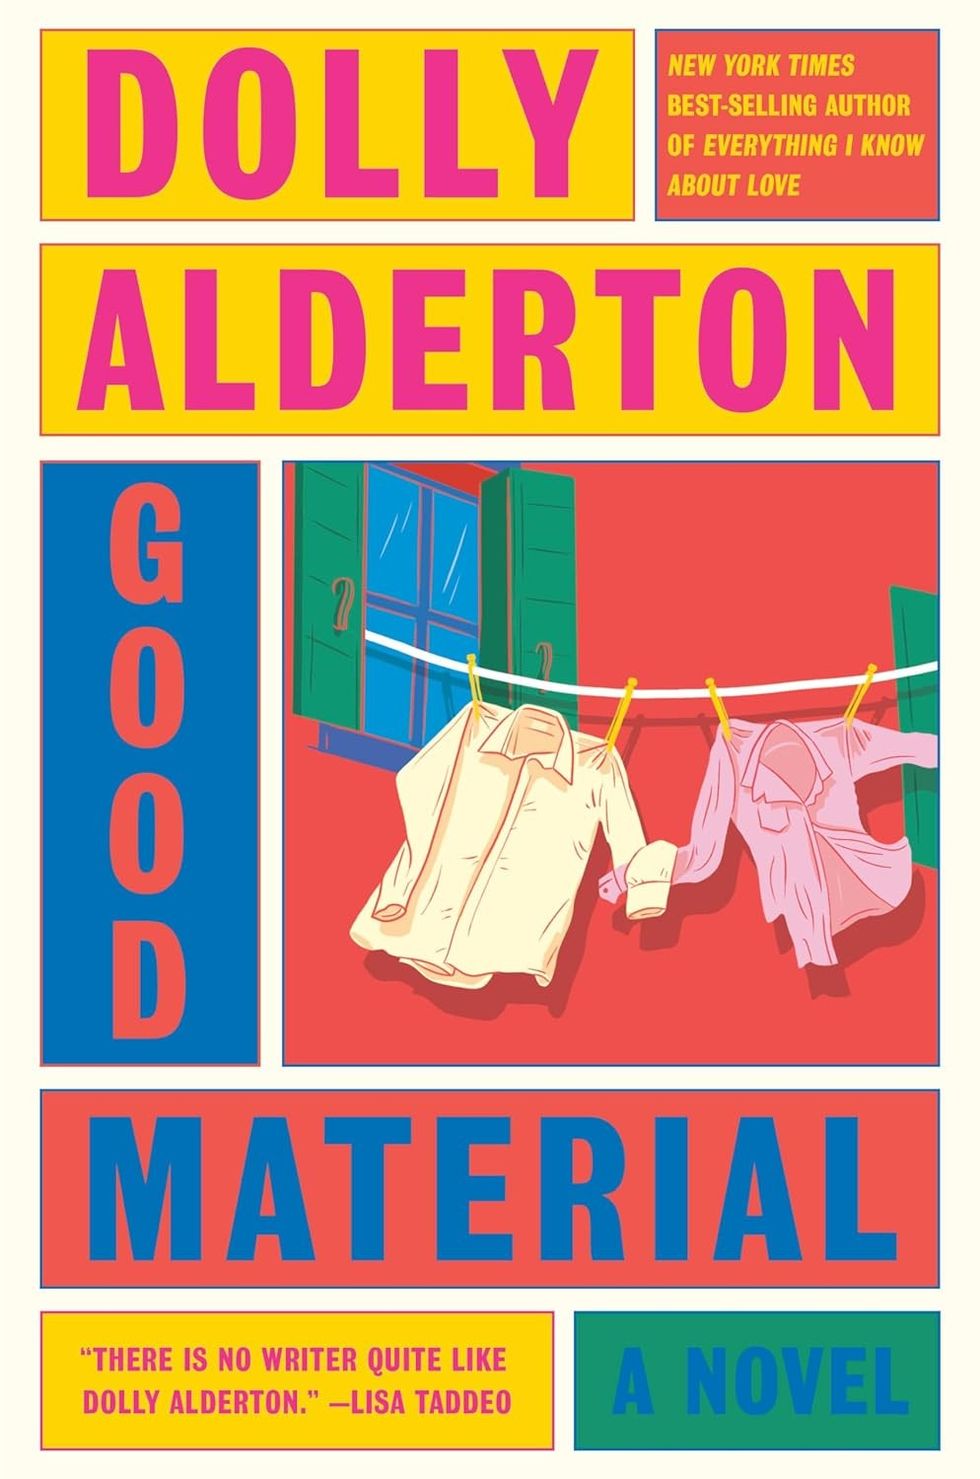 "Good Material" by Dolly Alderton